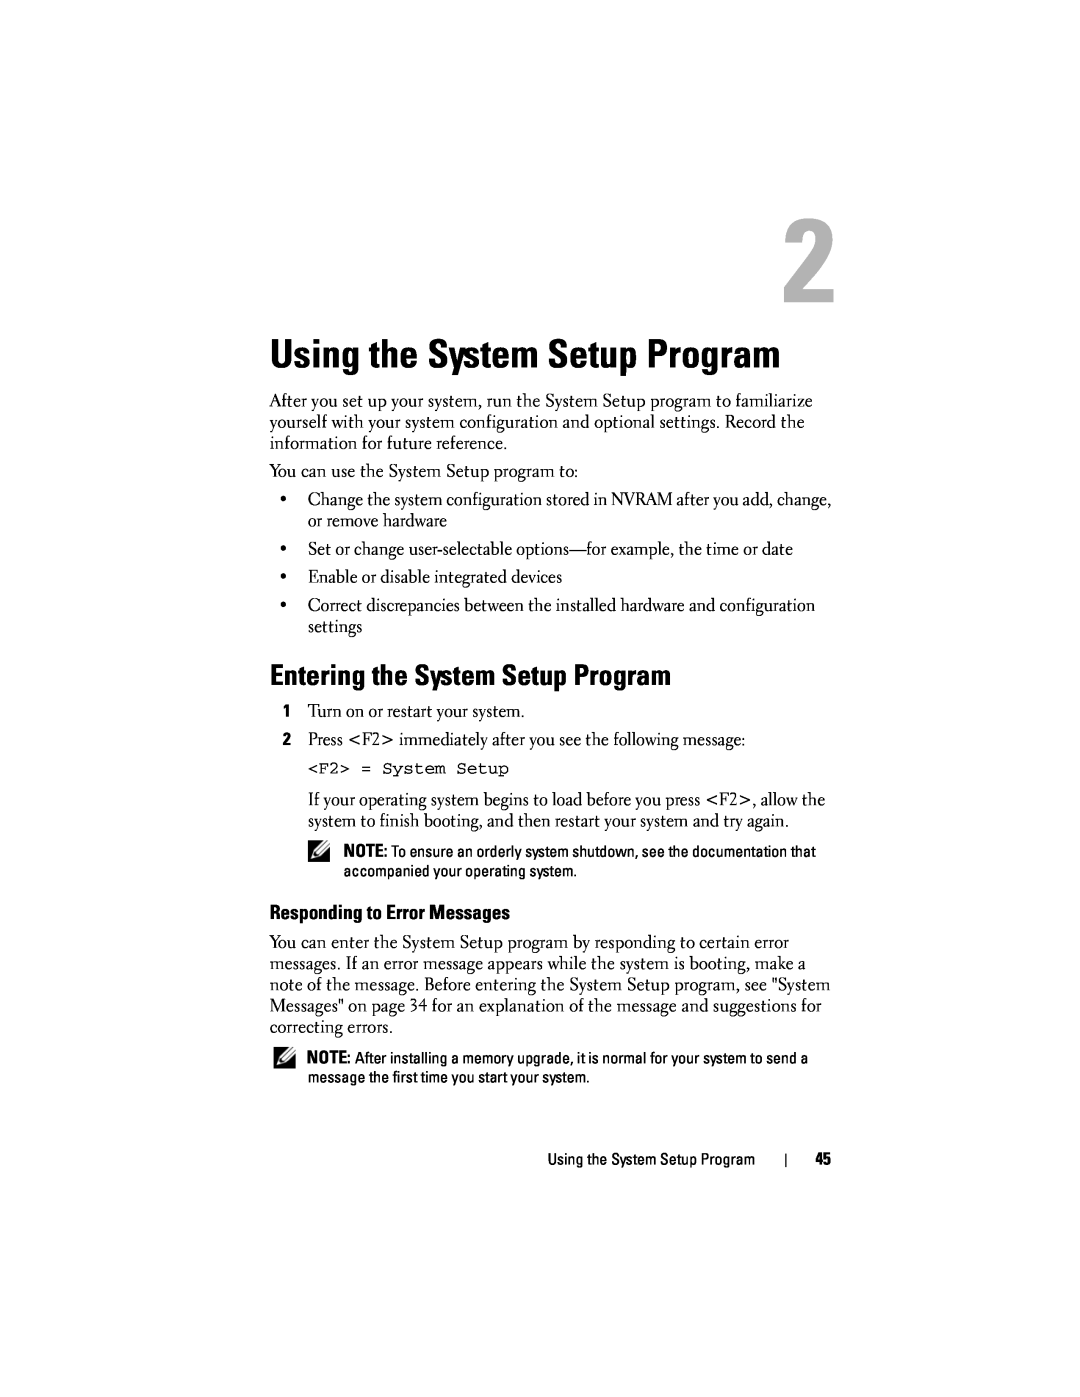 Dell R300 owner manual Using the System Setup Program, Entering the System Setup Program, Responding to Error Messages 